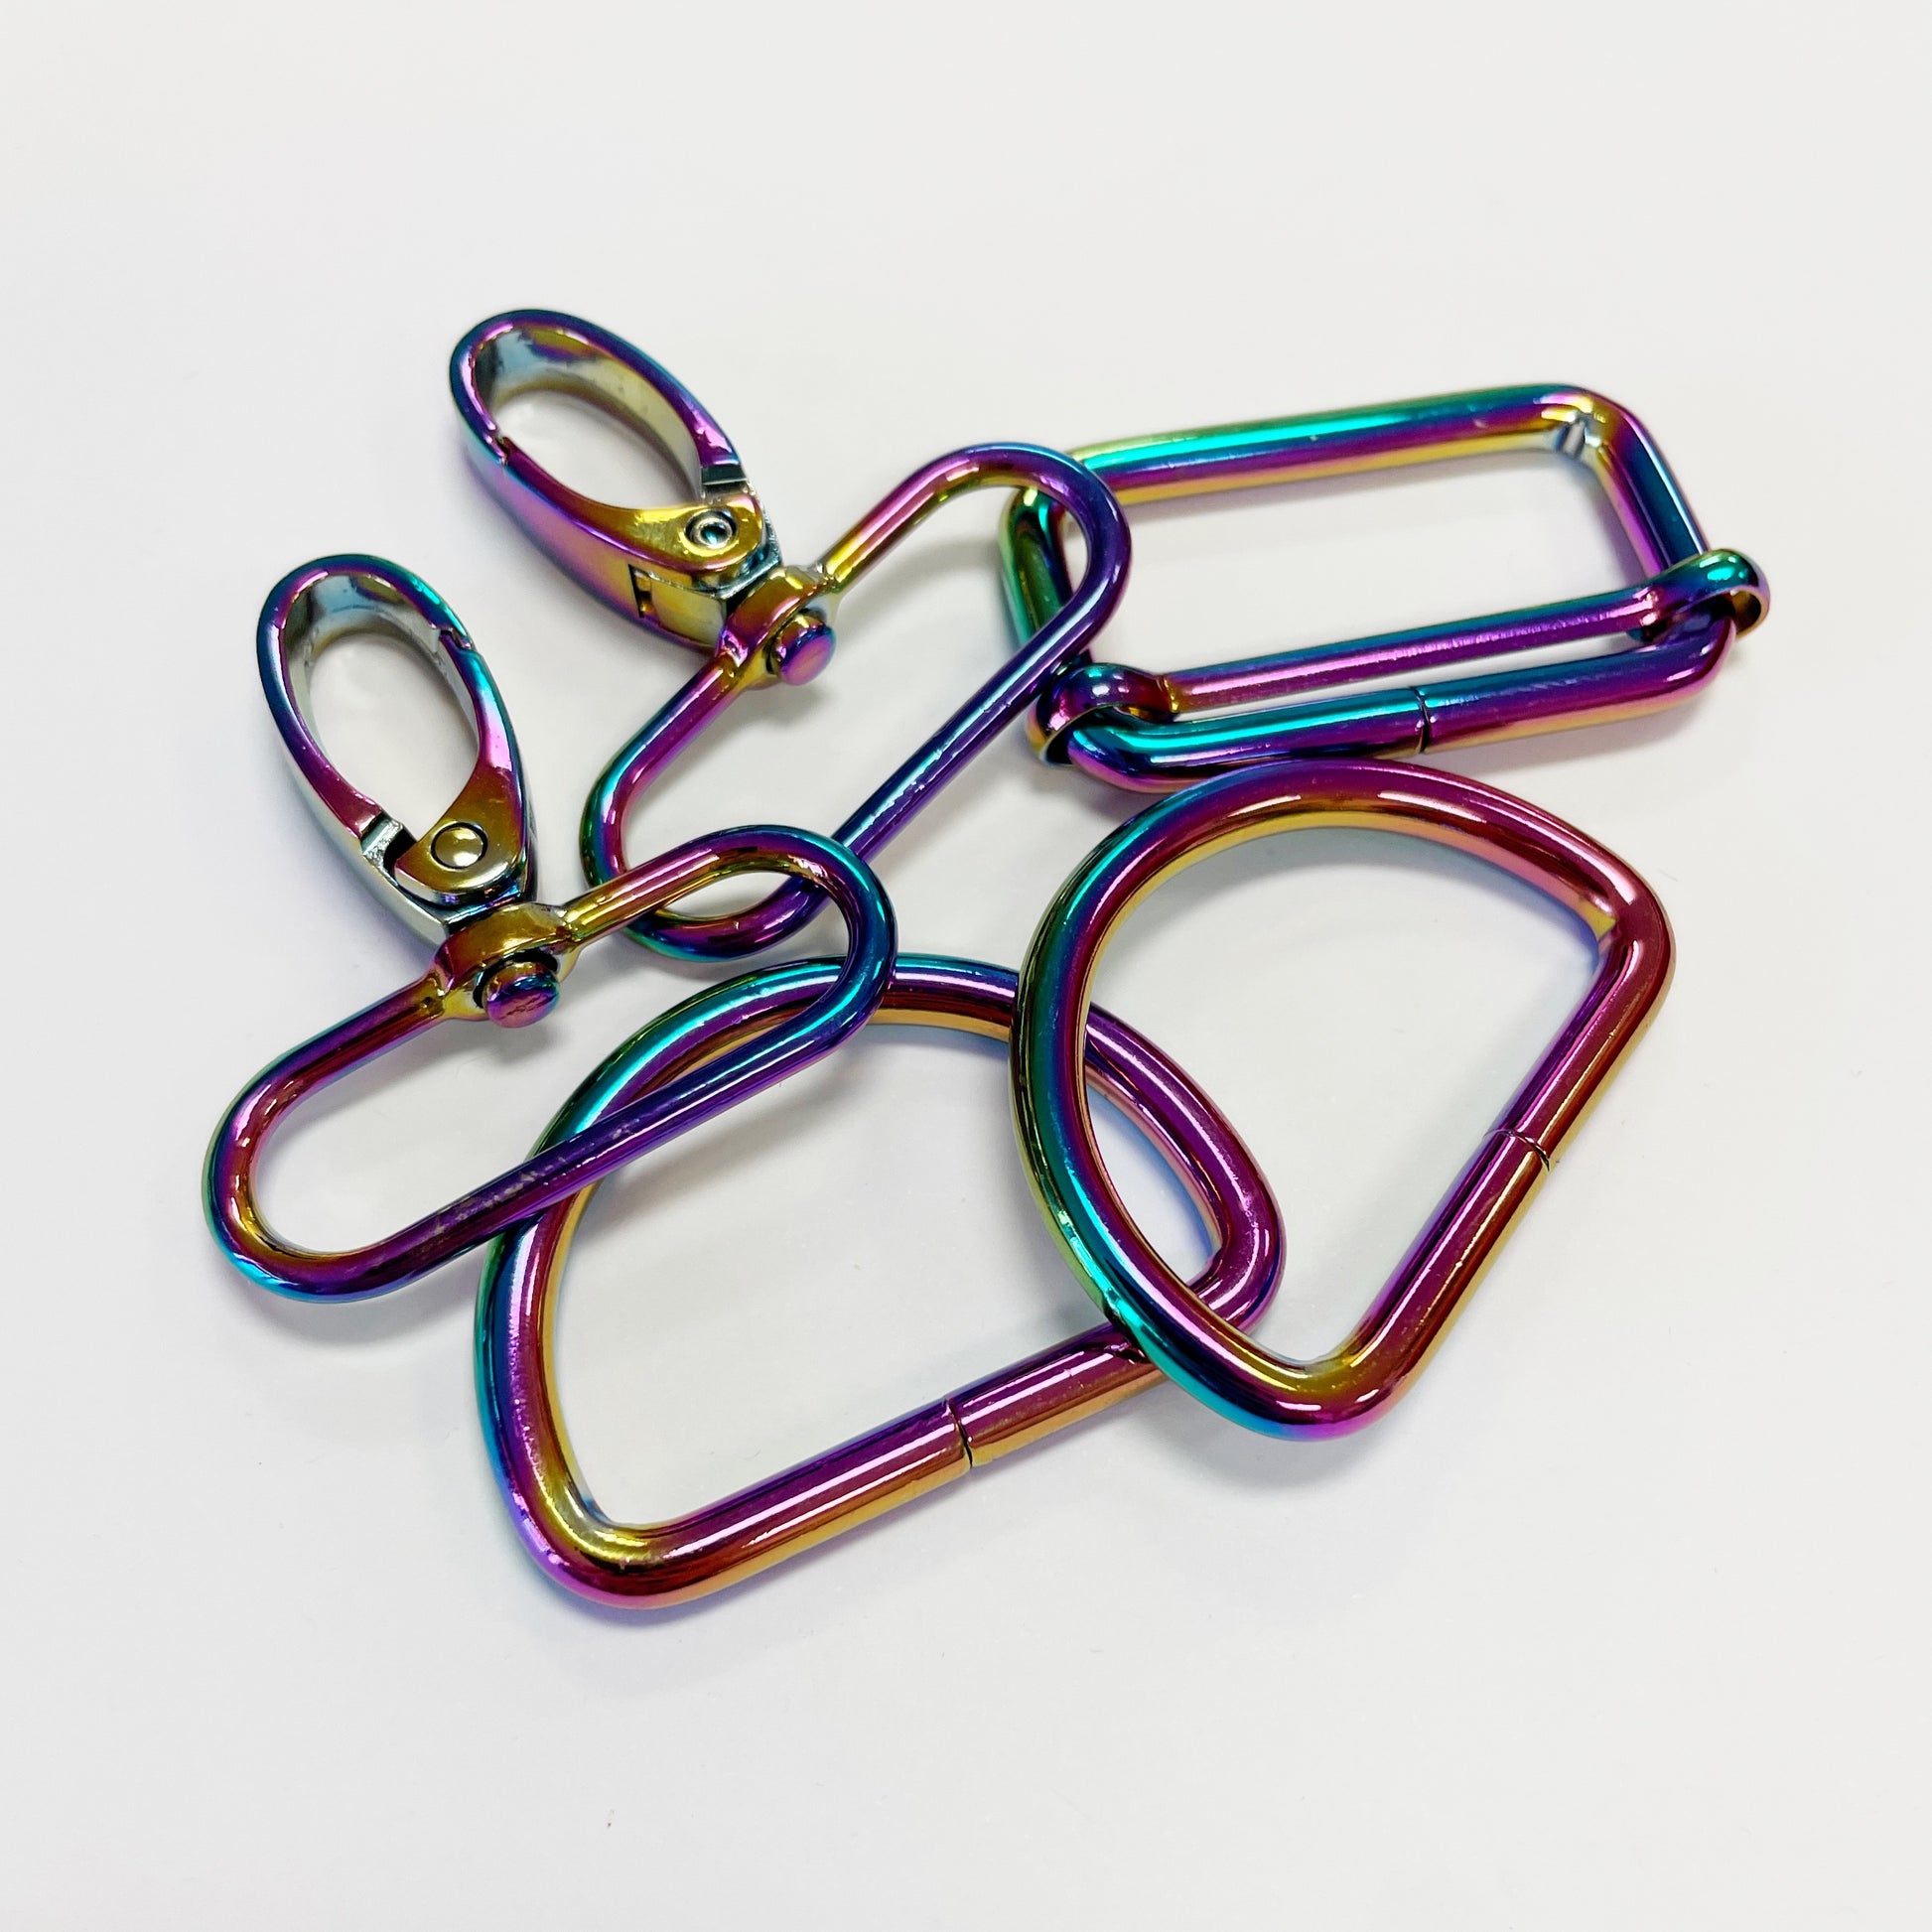 Sew Lovely Jubbly 1.5 inch Swivel Snap Hook 38mm Hardware Rainbow  Iridescent for Bag and Purse Making - Set of 2